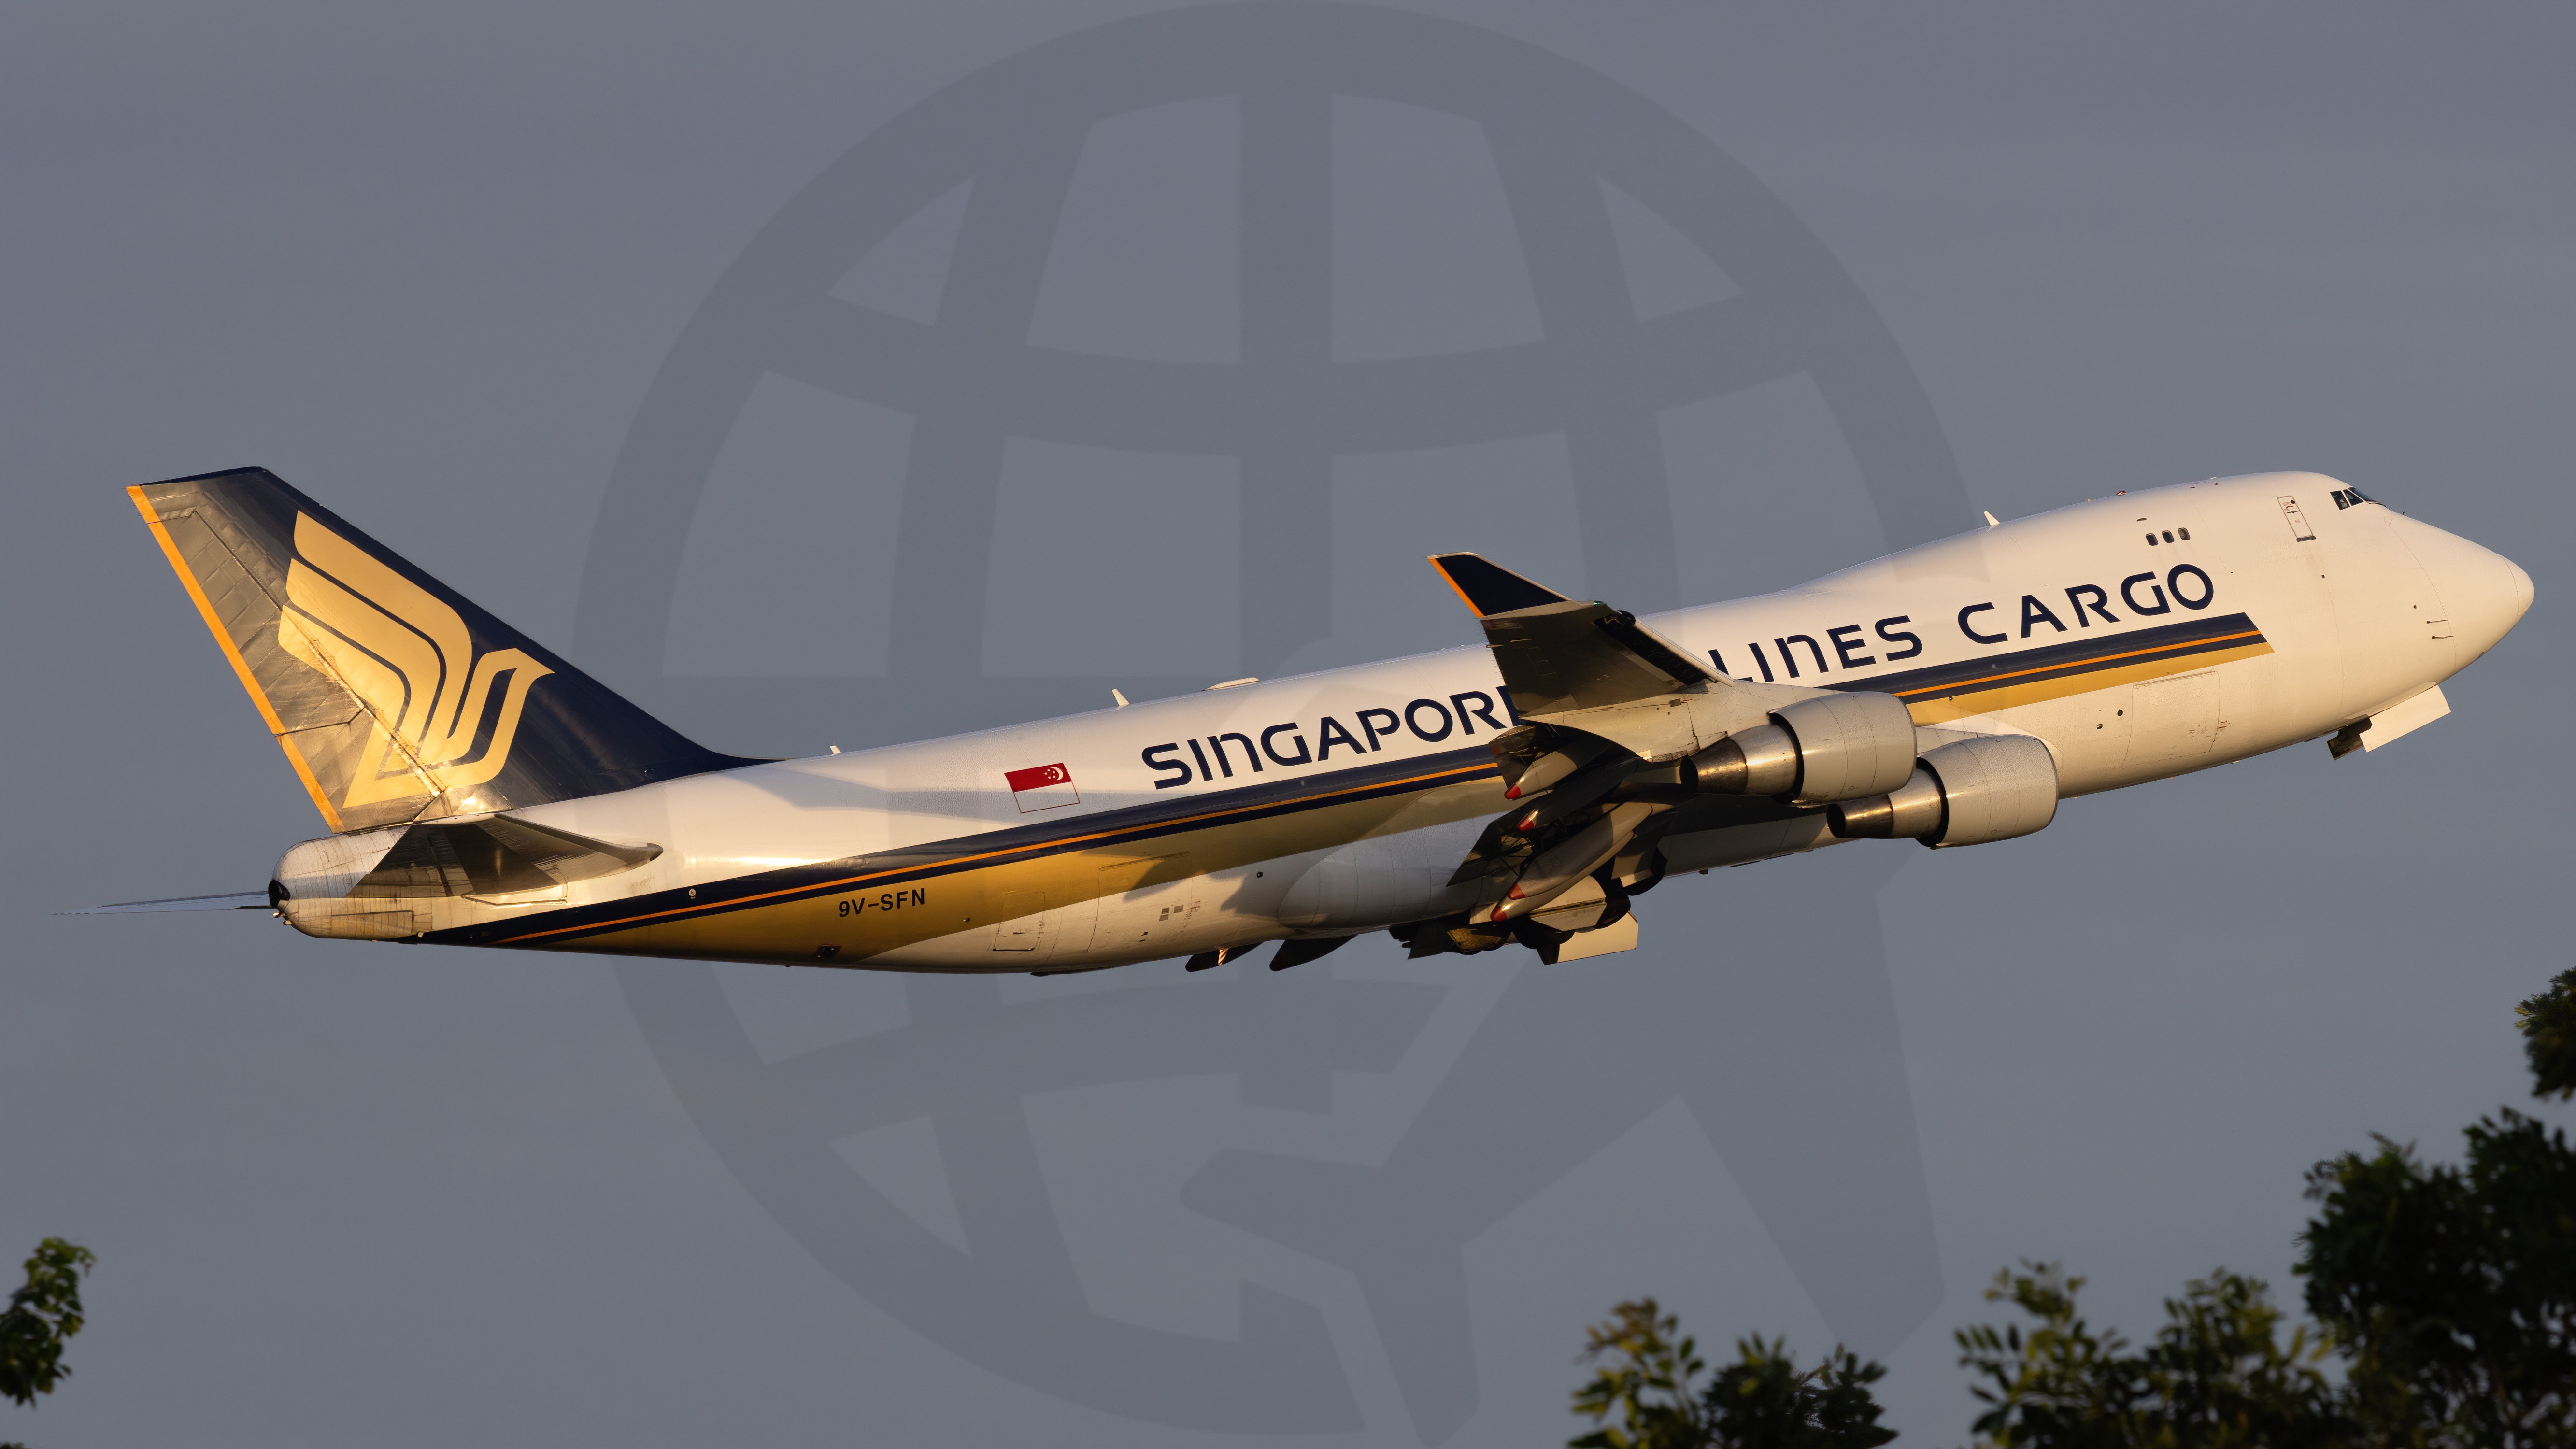 Photo of 9V-SFN - Singapore Airlines Cargo Boeing 747-400F